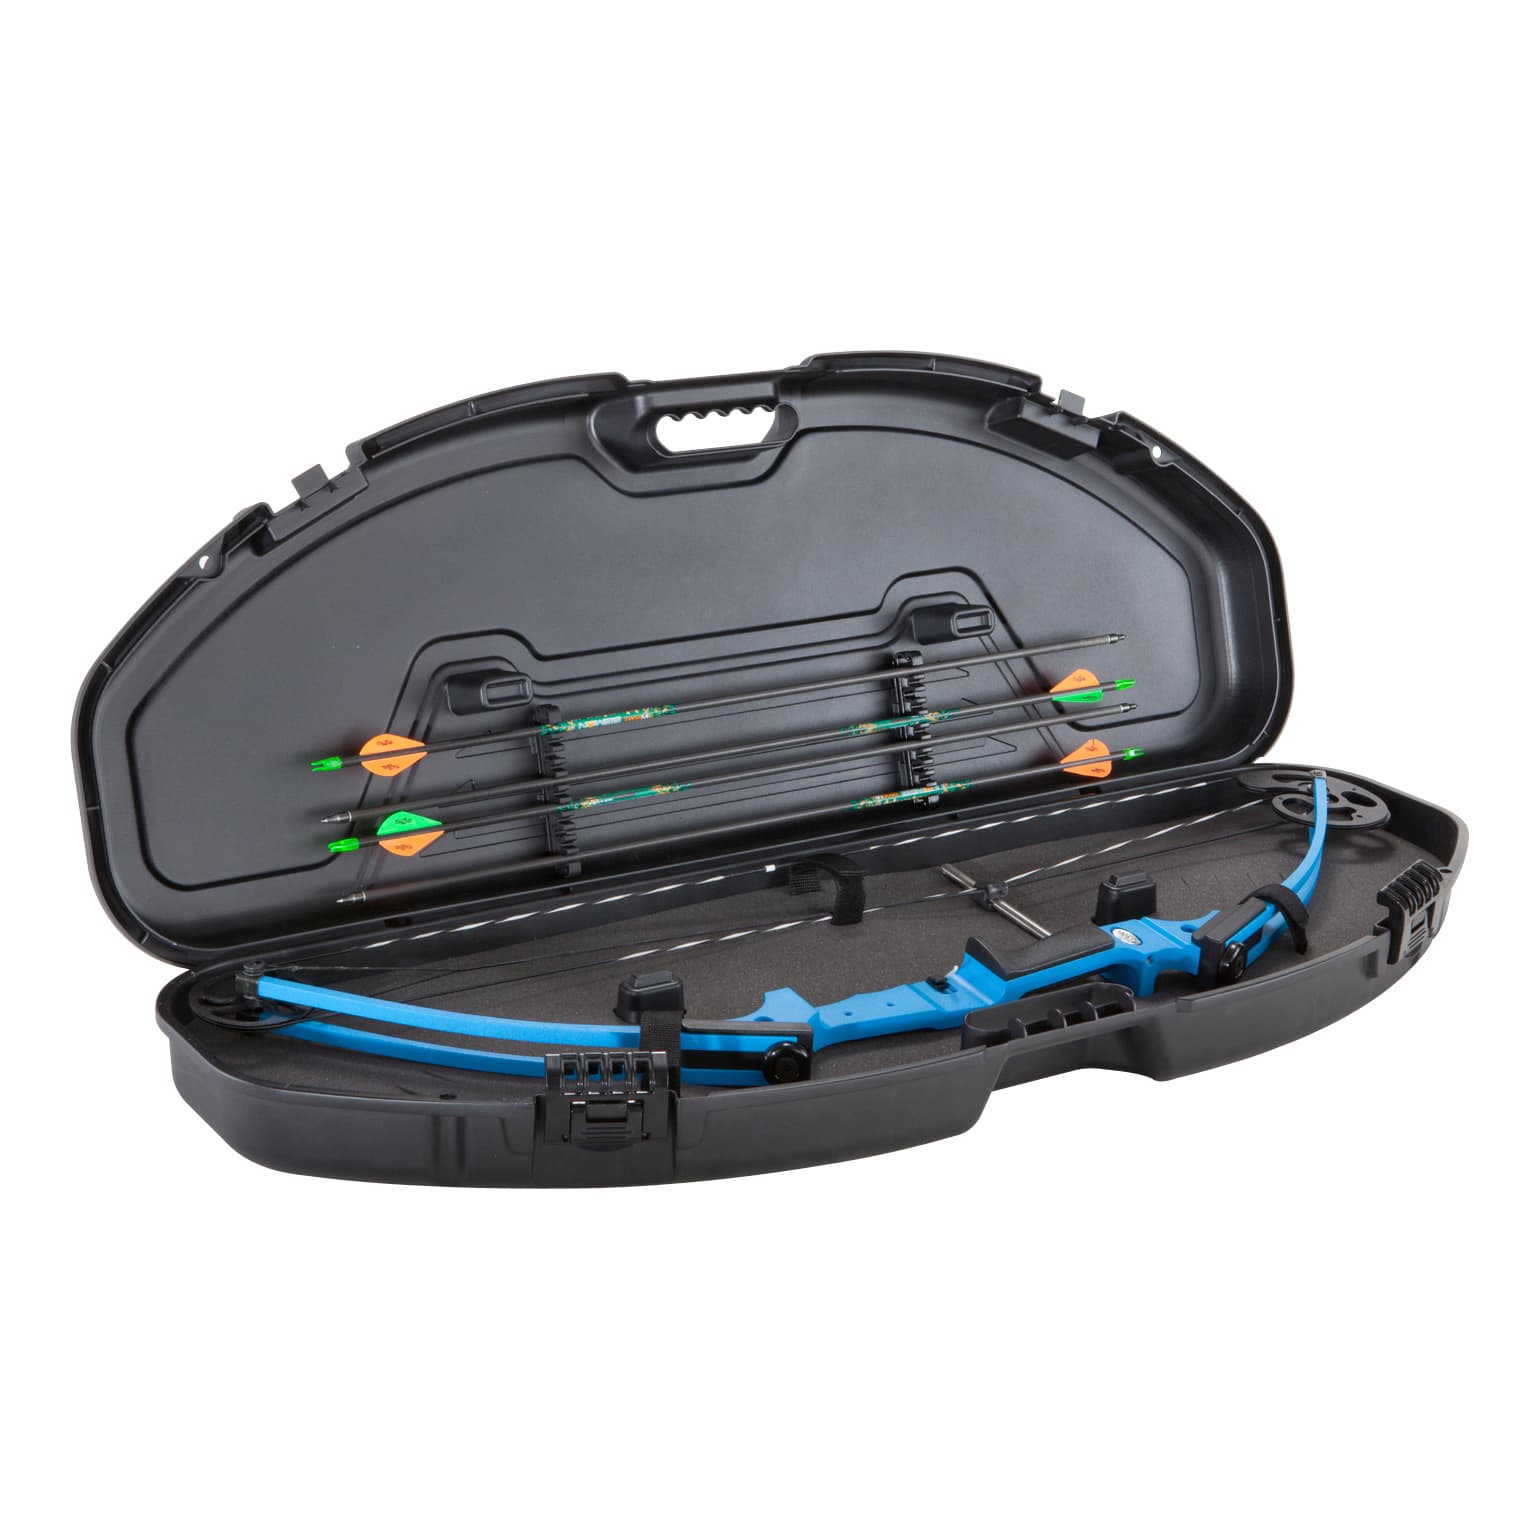 Plano Protector Ultra Compact Compound Bow Case